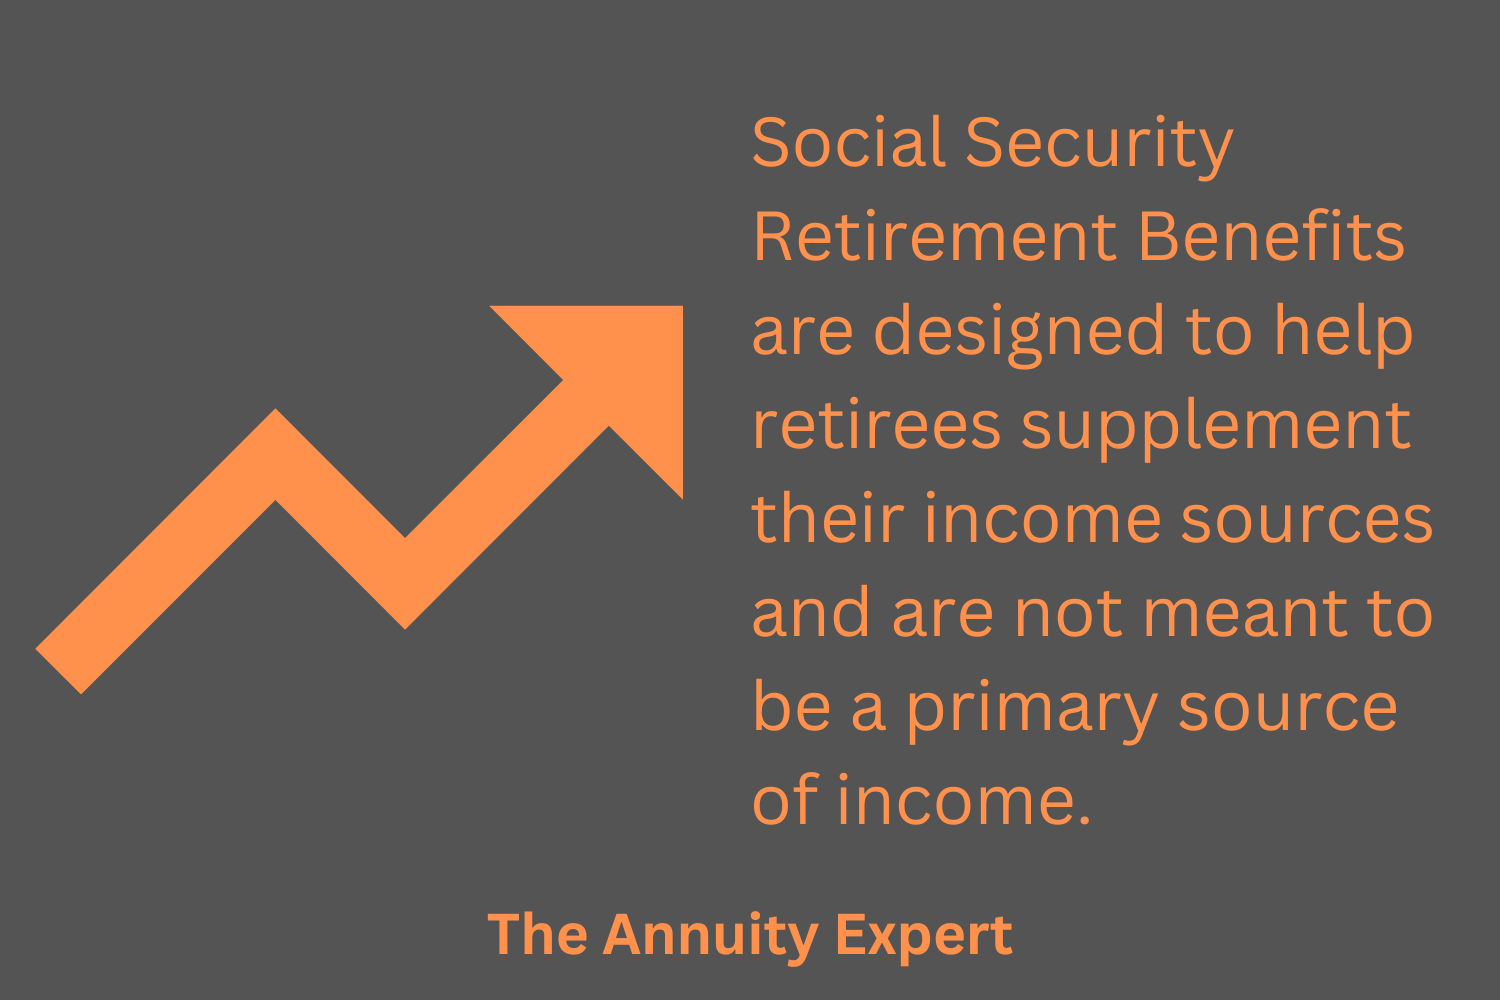 Can I Live Solely Off Social Security Retirement Benefits?